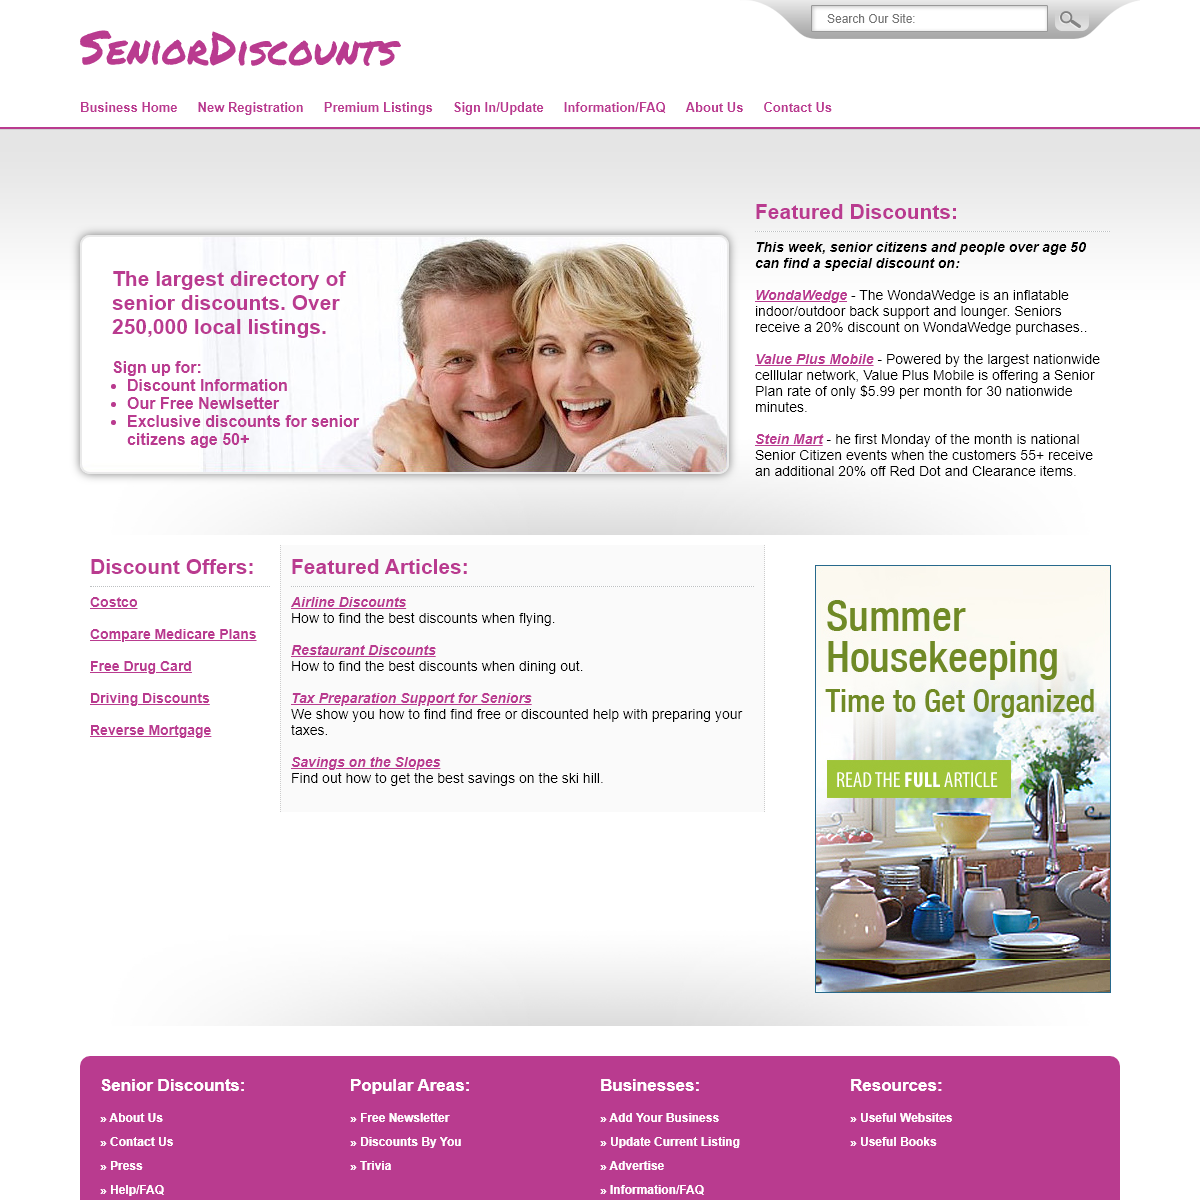 SeniorDiscounts.com - Over 150,000 Discounts for People Over 50 - Deals, Bargains and Savings